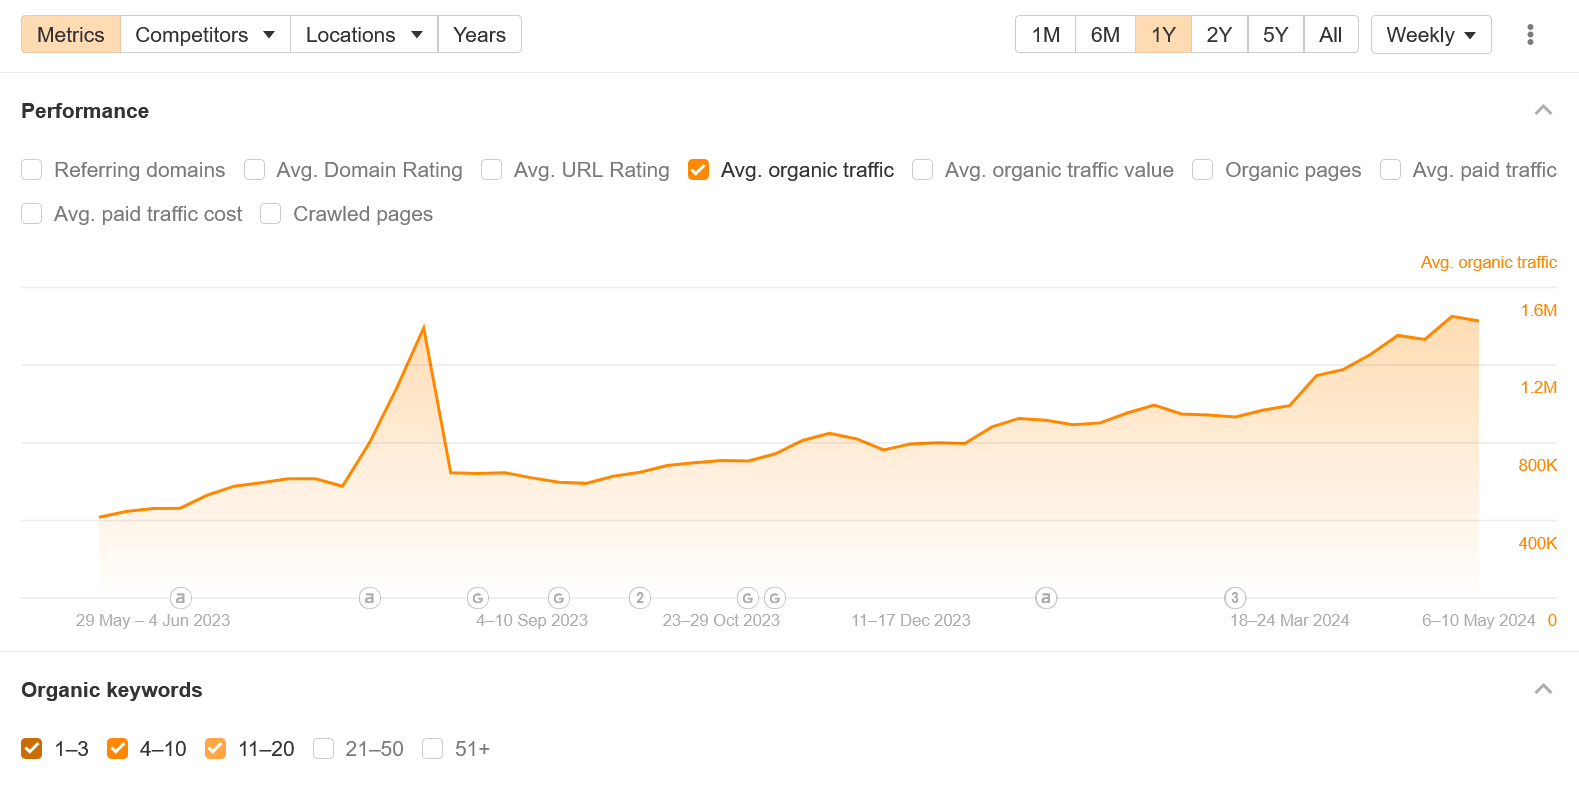 Why is Hacker News spiking in organic traffic?